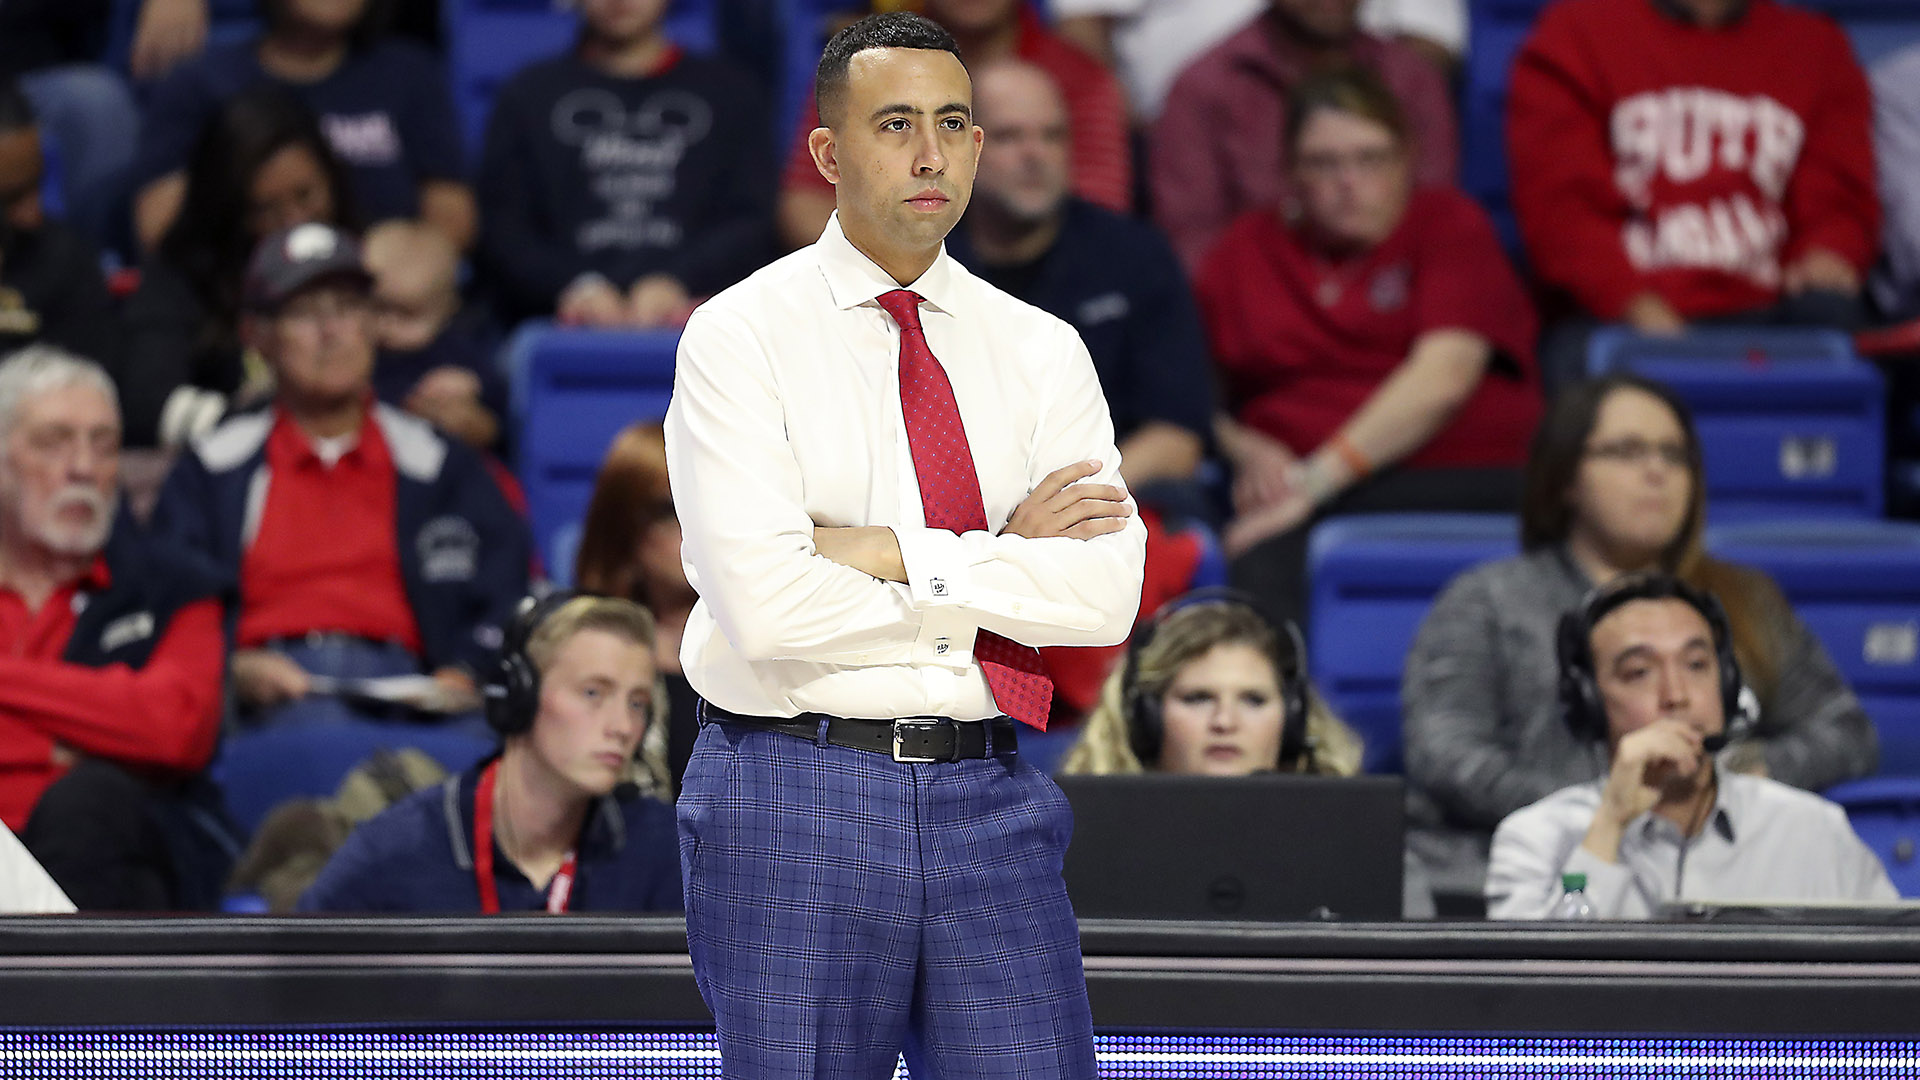 LISTEN: How is South Alabama doing in basketball? Find out from head coach Richie Riley!